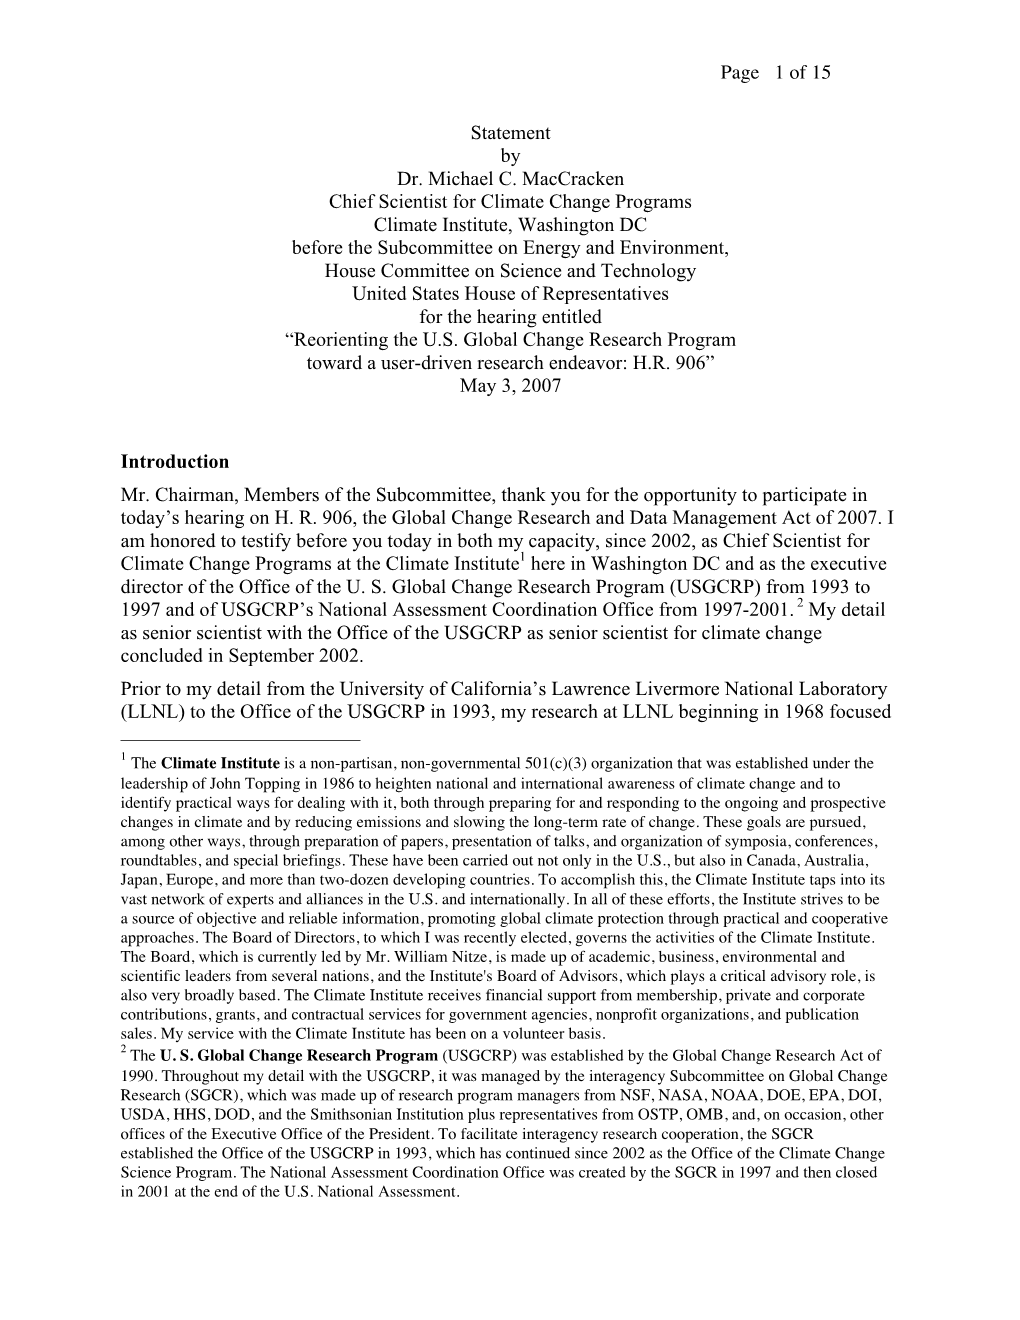 Page 1 of 15 Statement by Dr. Michael C. Maccracken Chief Scientist For